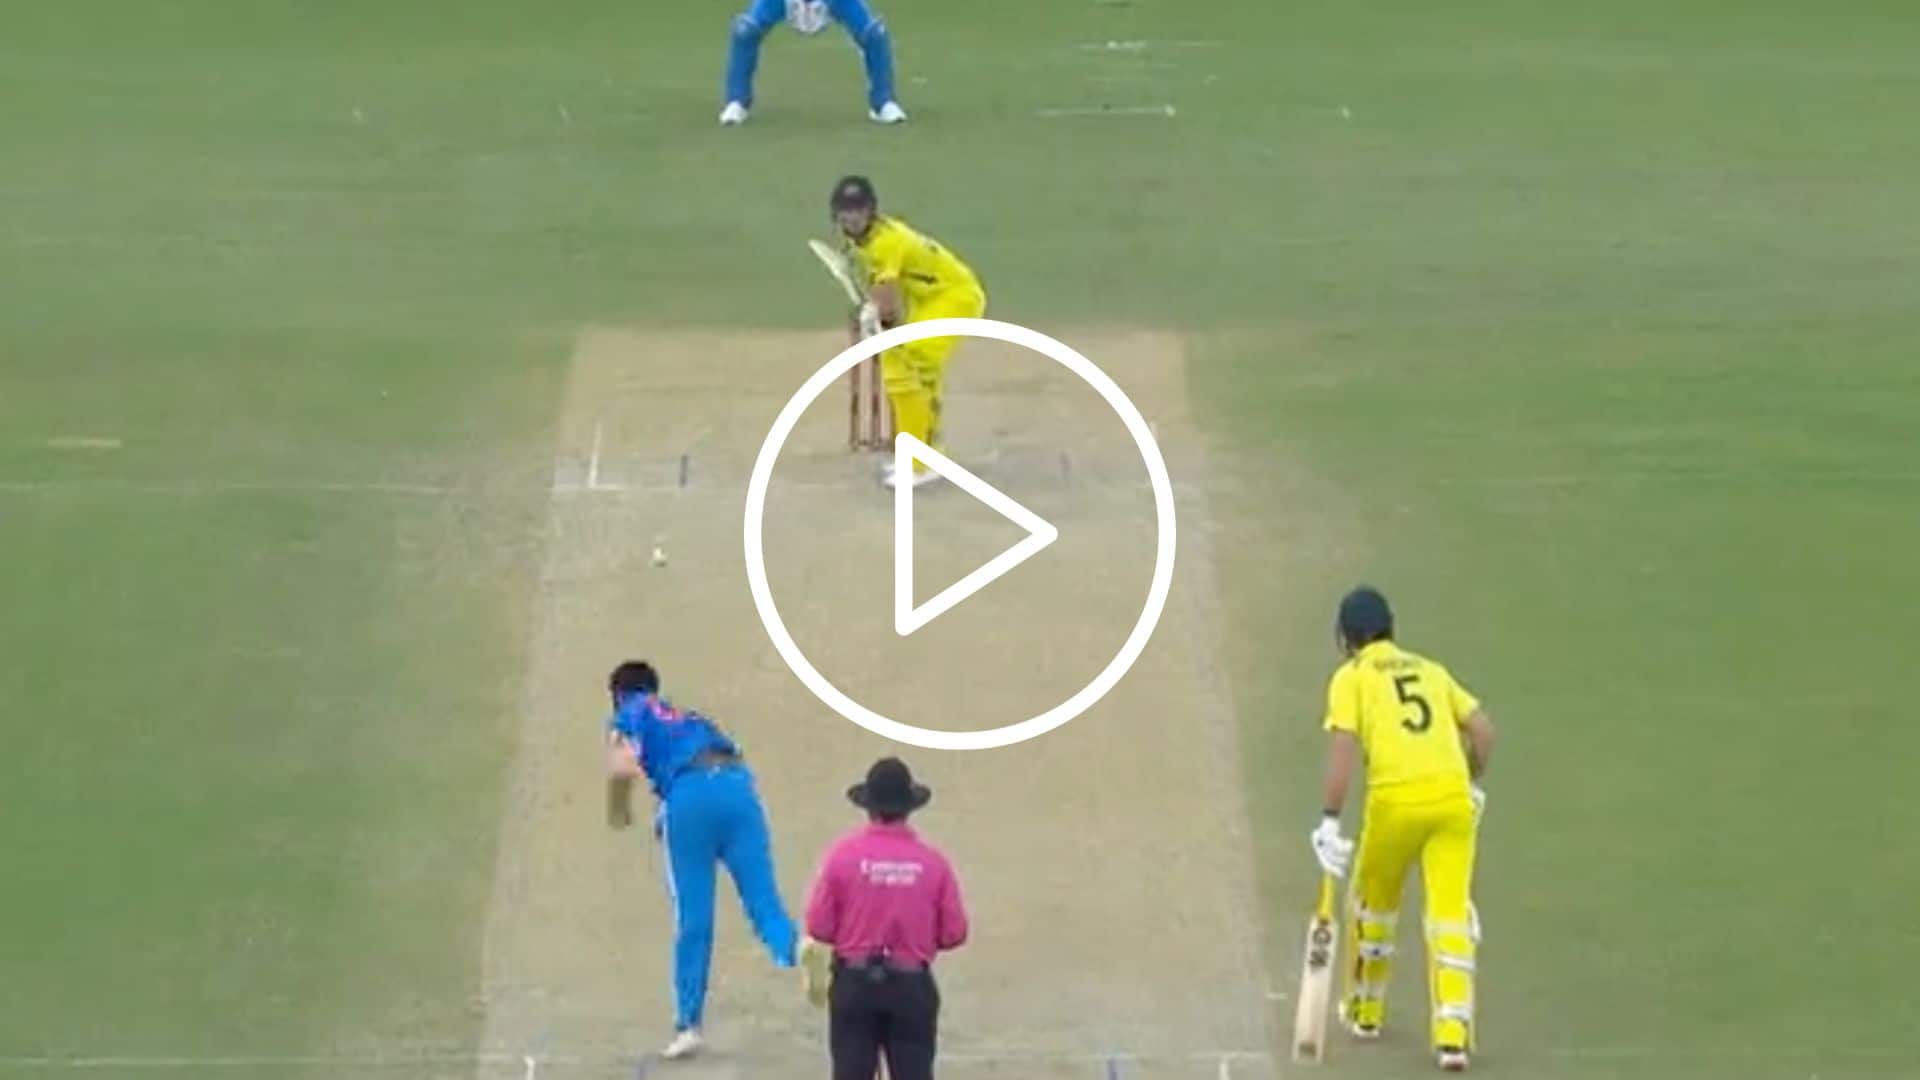 [Watch] Jasprit Bumrah’s Brilliant Slower Ball Leaves Inglis Too Hot To Handle